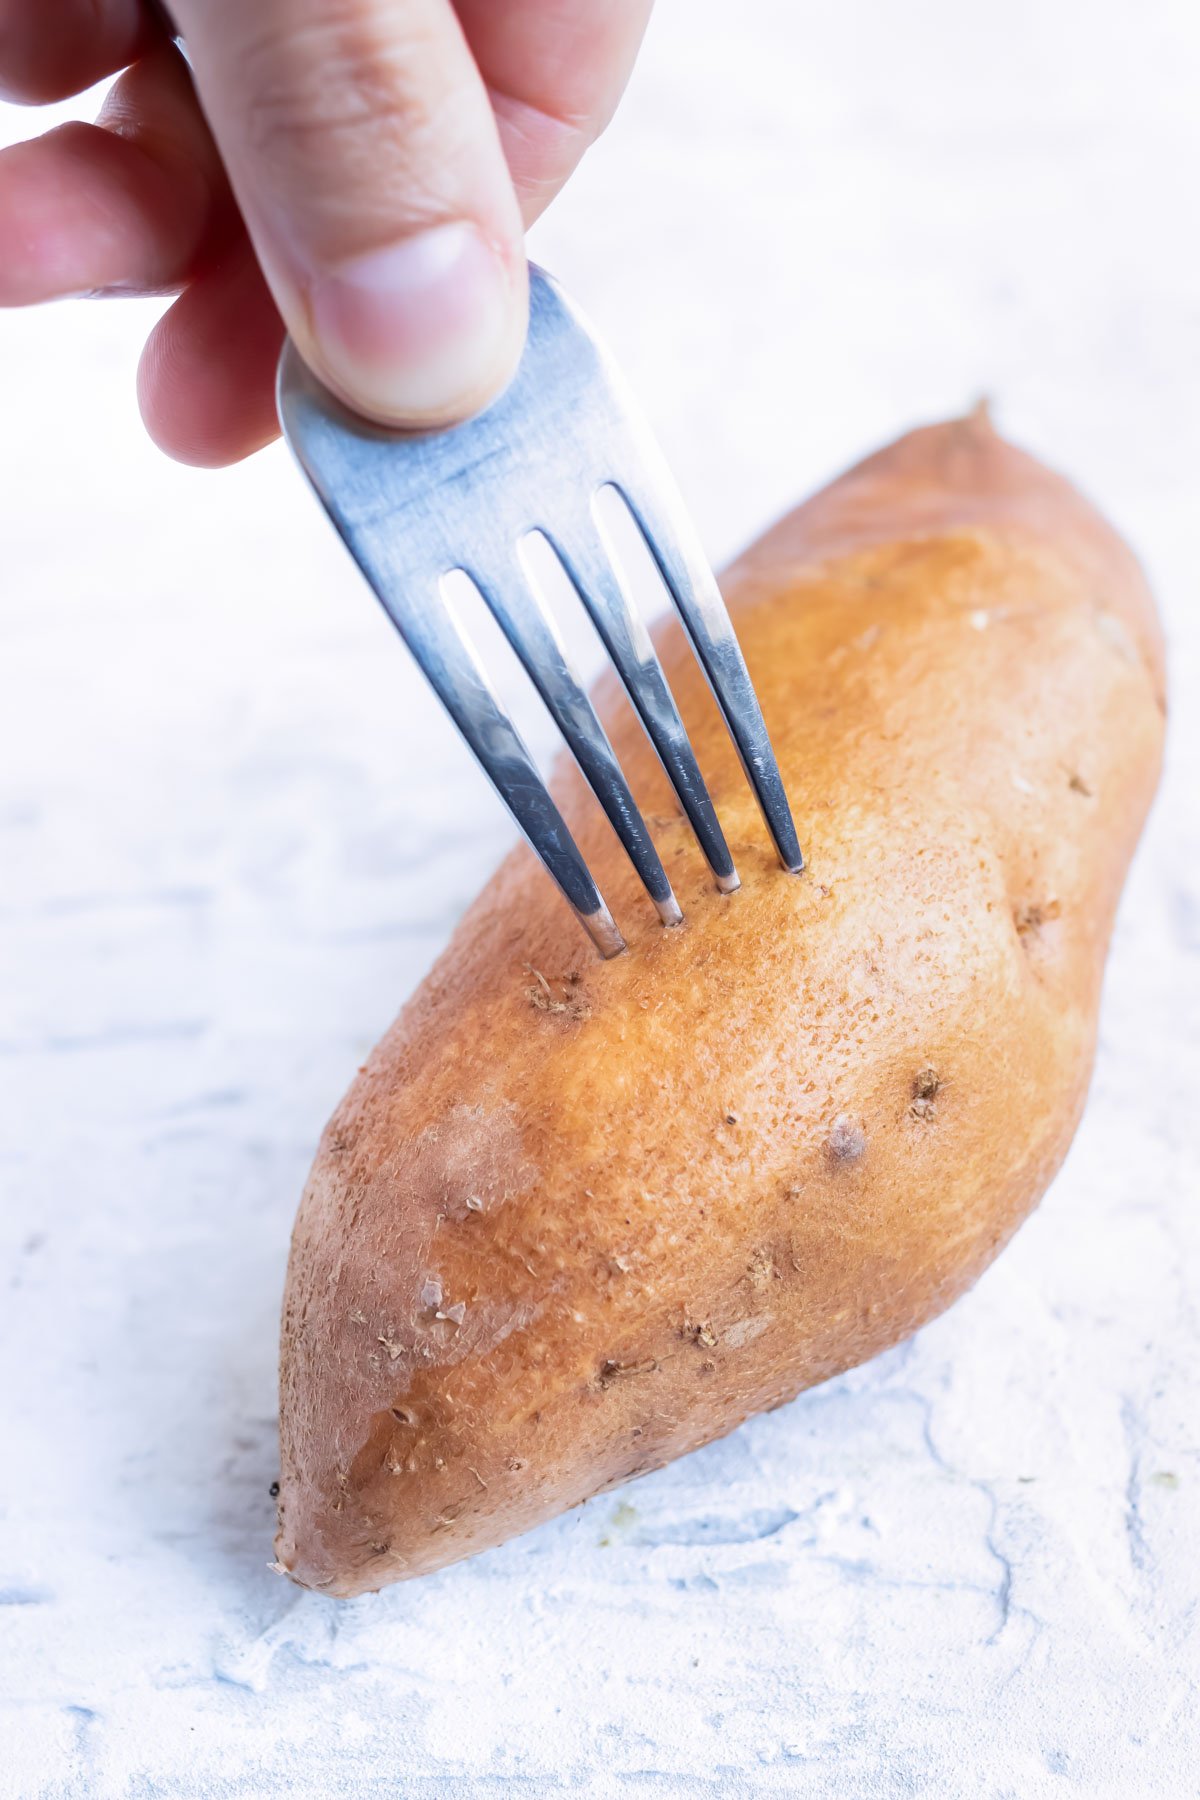 A sweet potato is poked with a fork before baking.